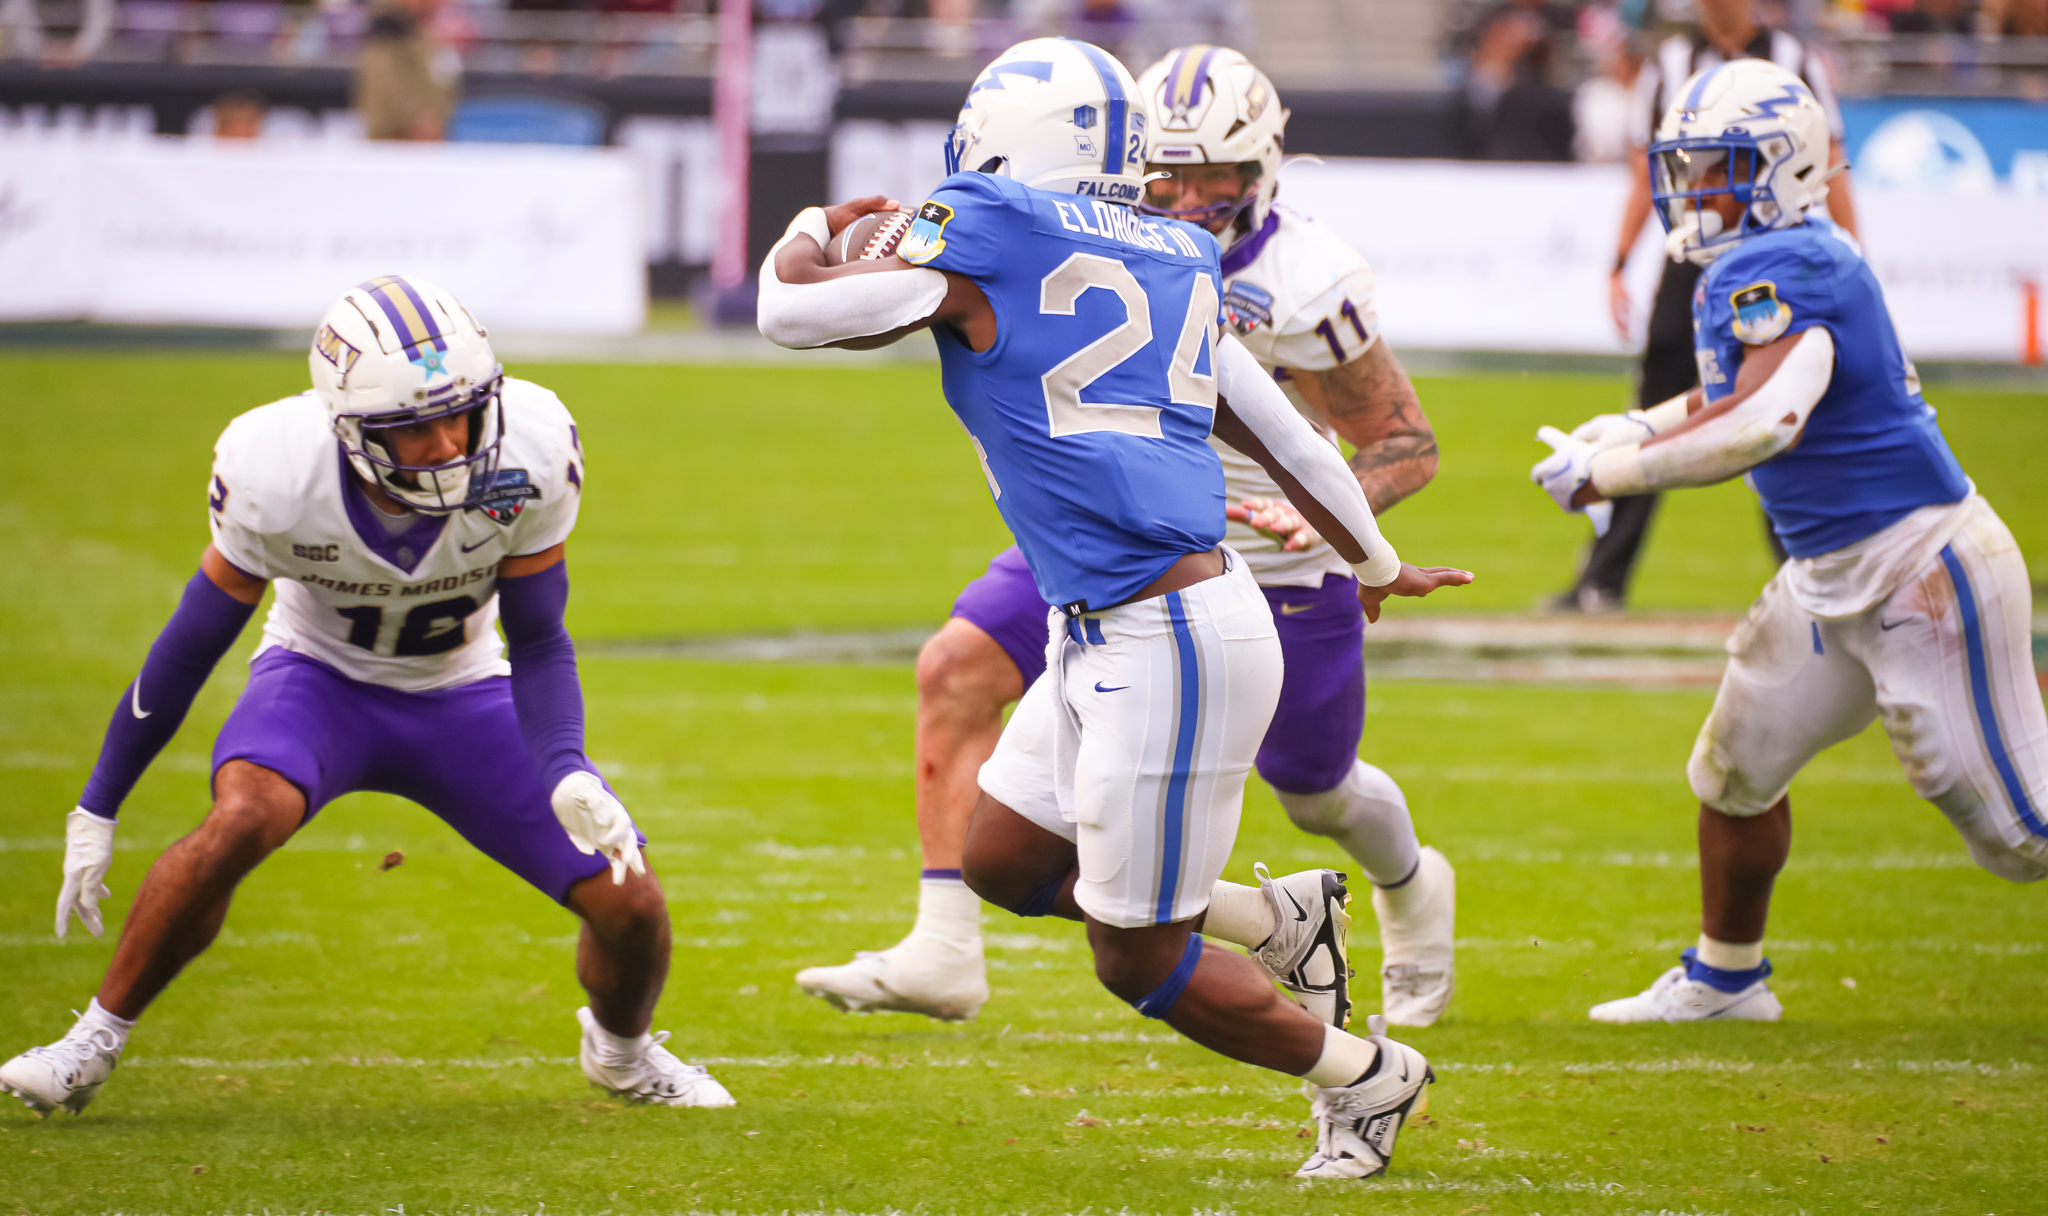 LMAFB Bowl Notes/Quotes: Air Force 31, James Madison 21